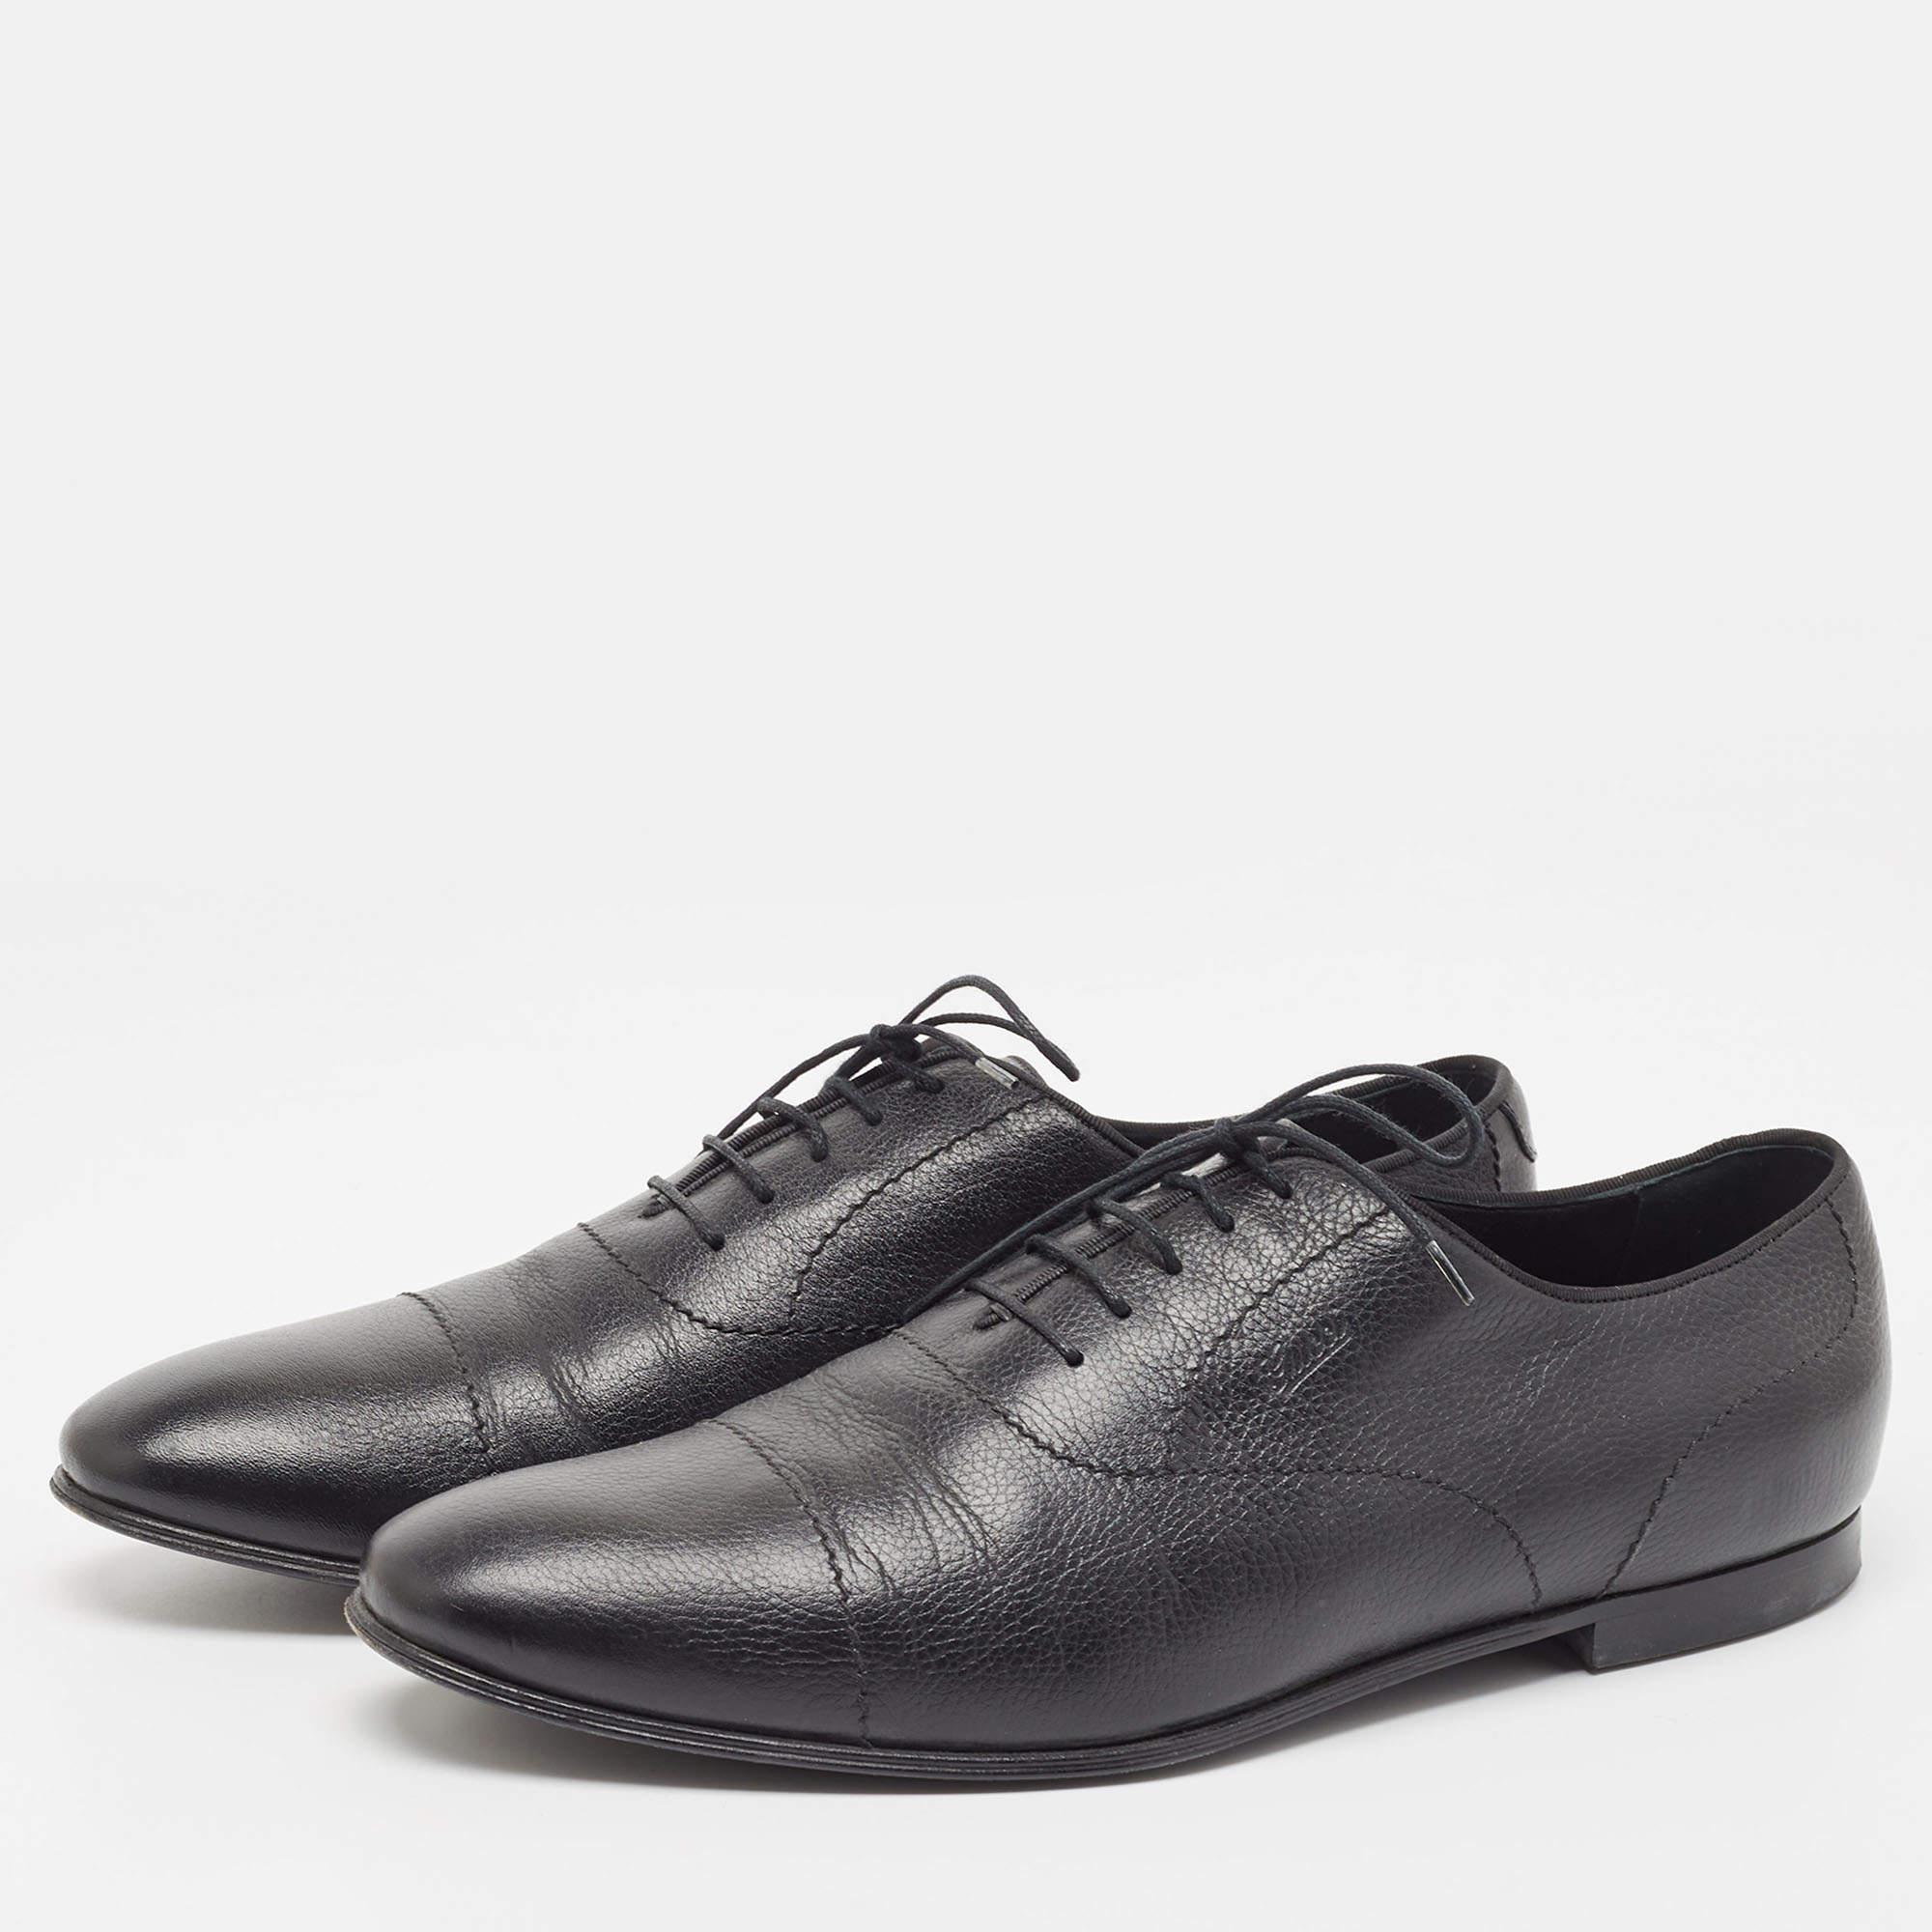 Gucci Black Leather Lace Up Oxfords Size 43 For Sale 2